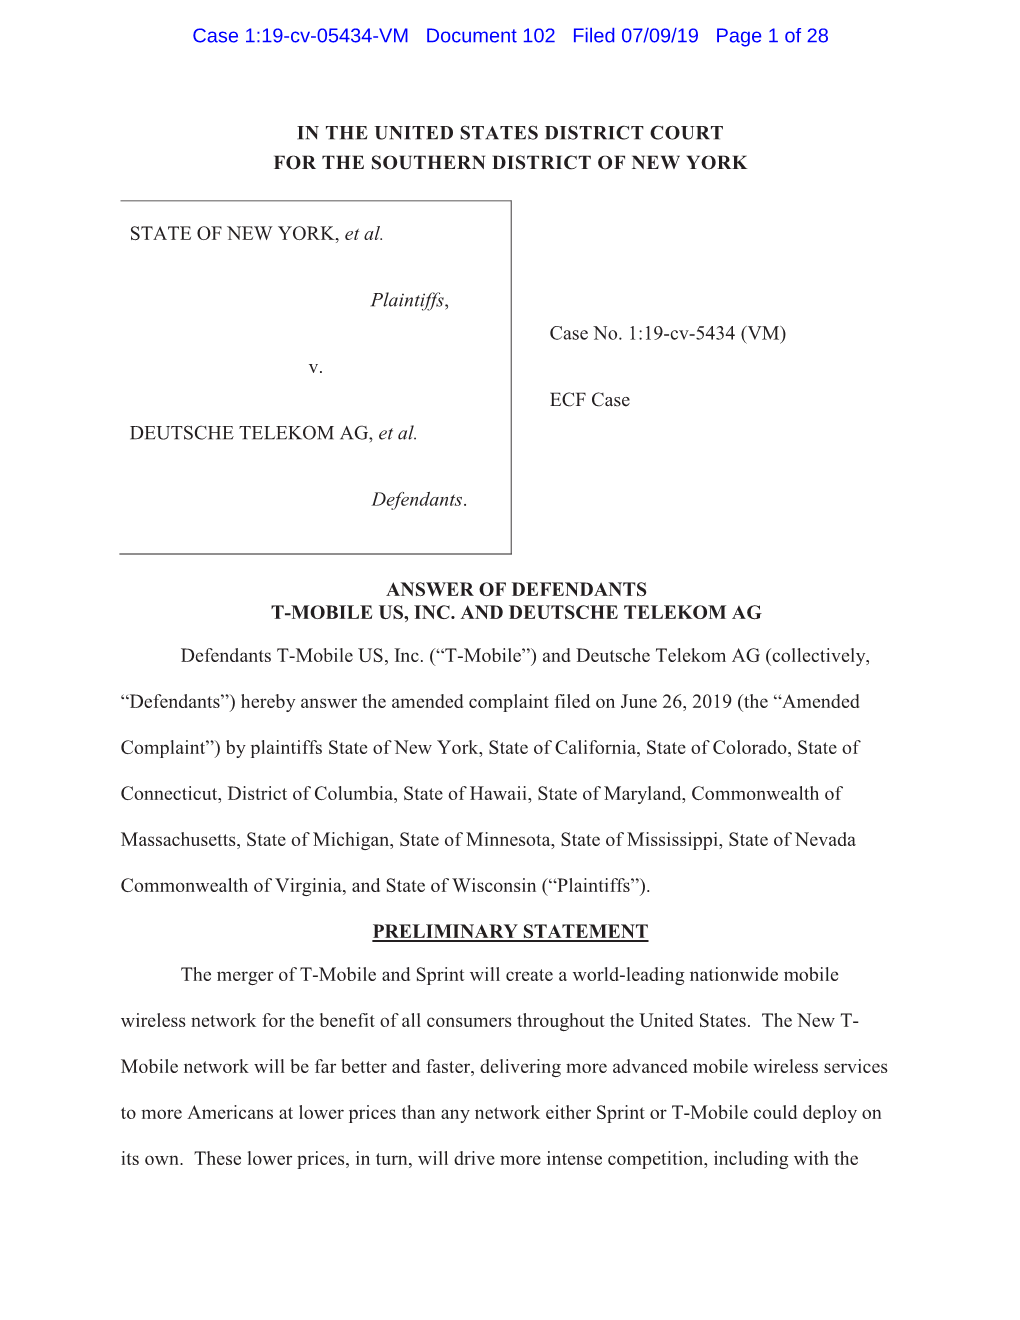 Case 1:19-Cv-05434-VM Document 102 Filed 07/09/19 Page 1 of 28